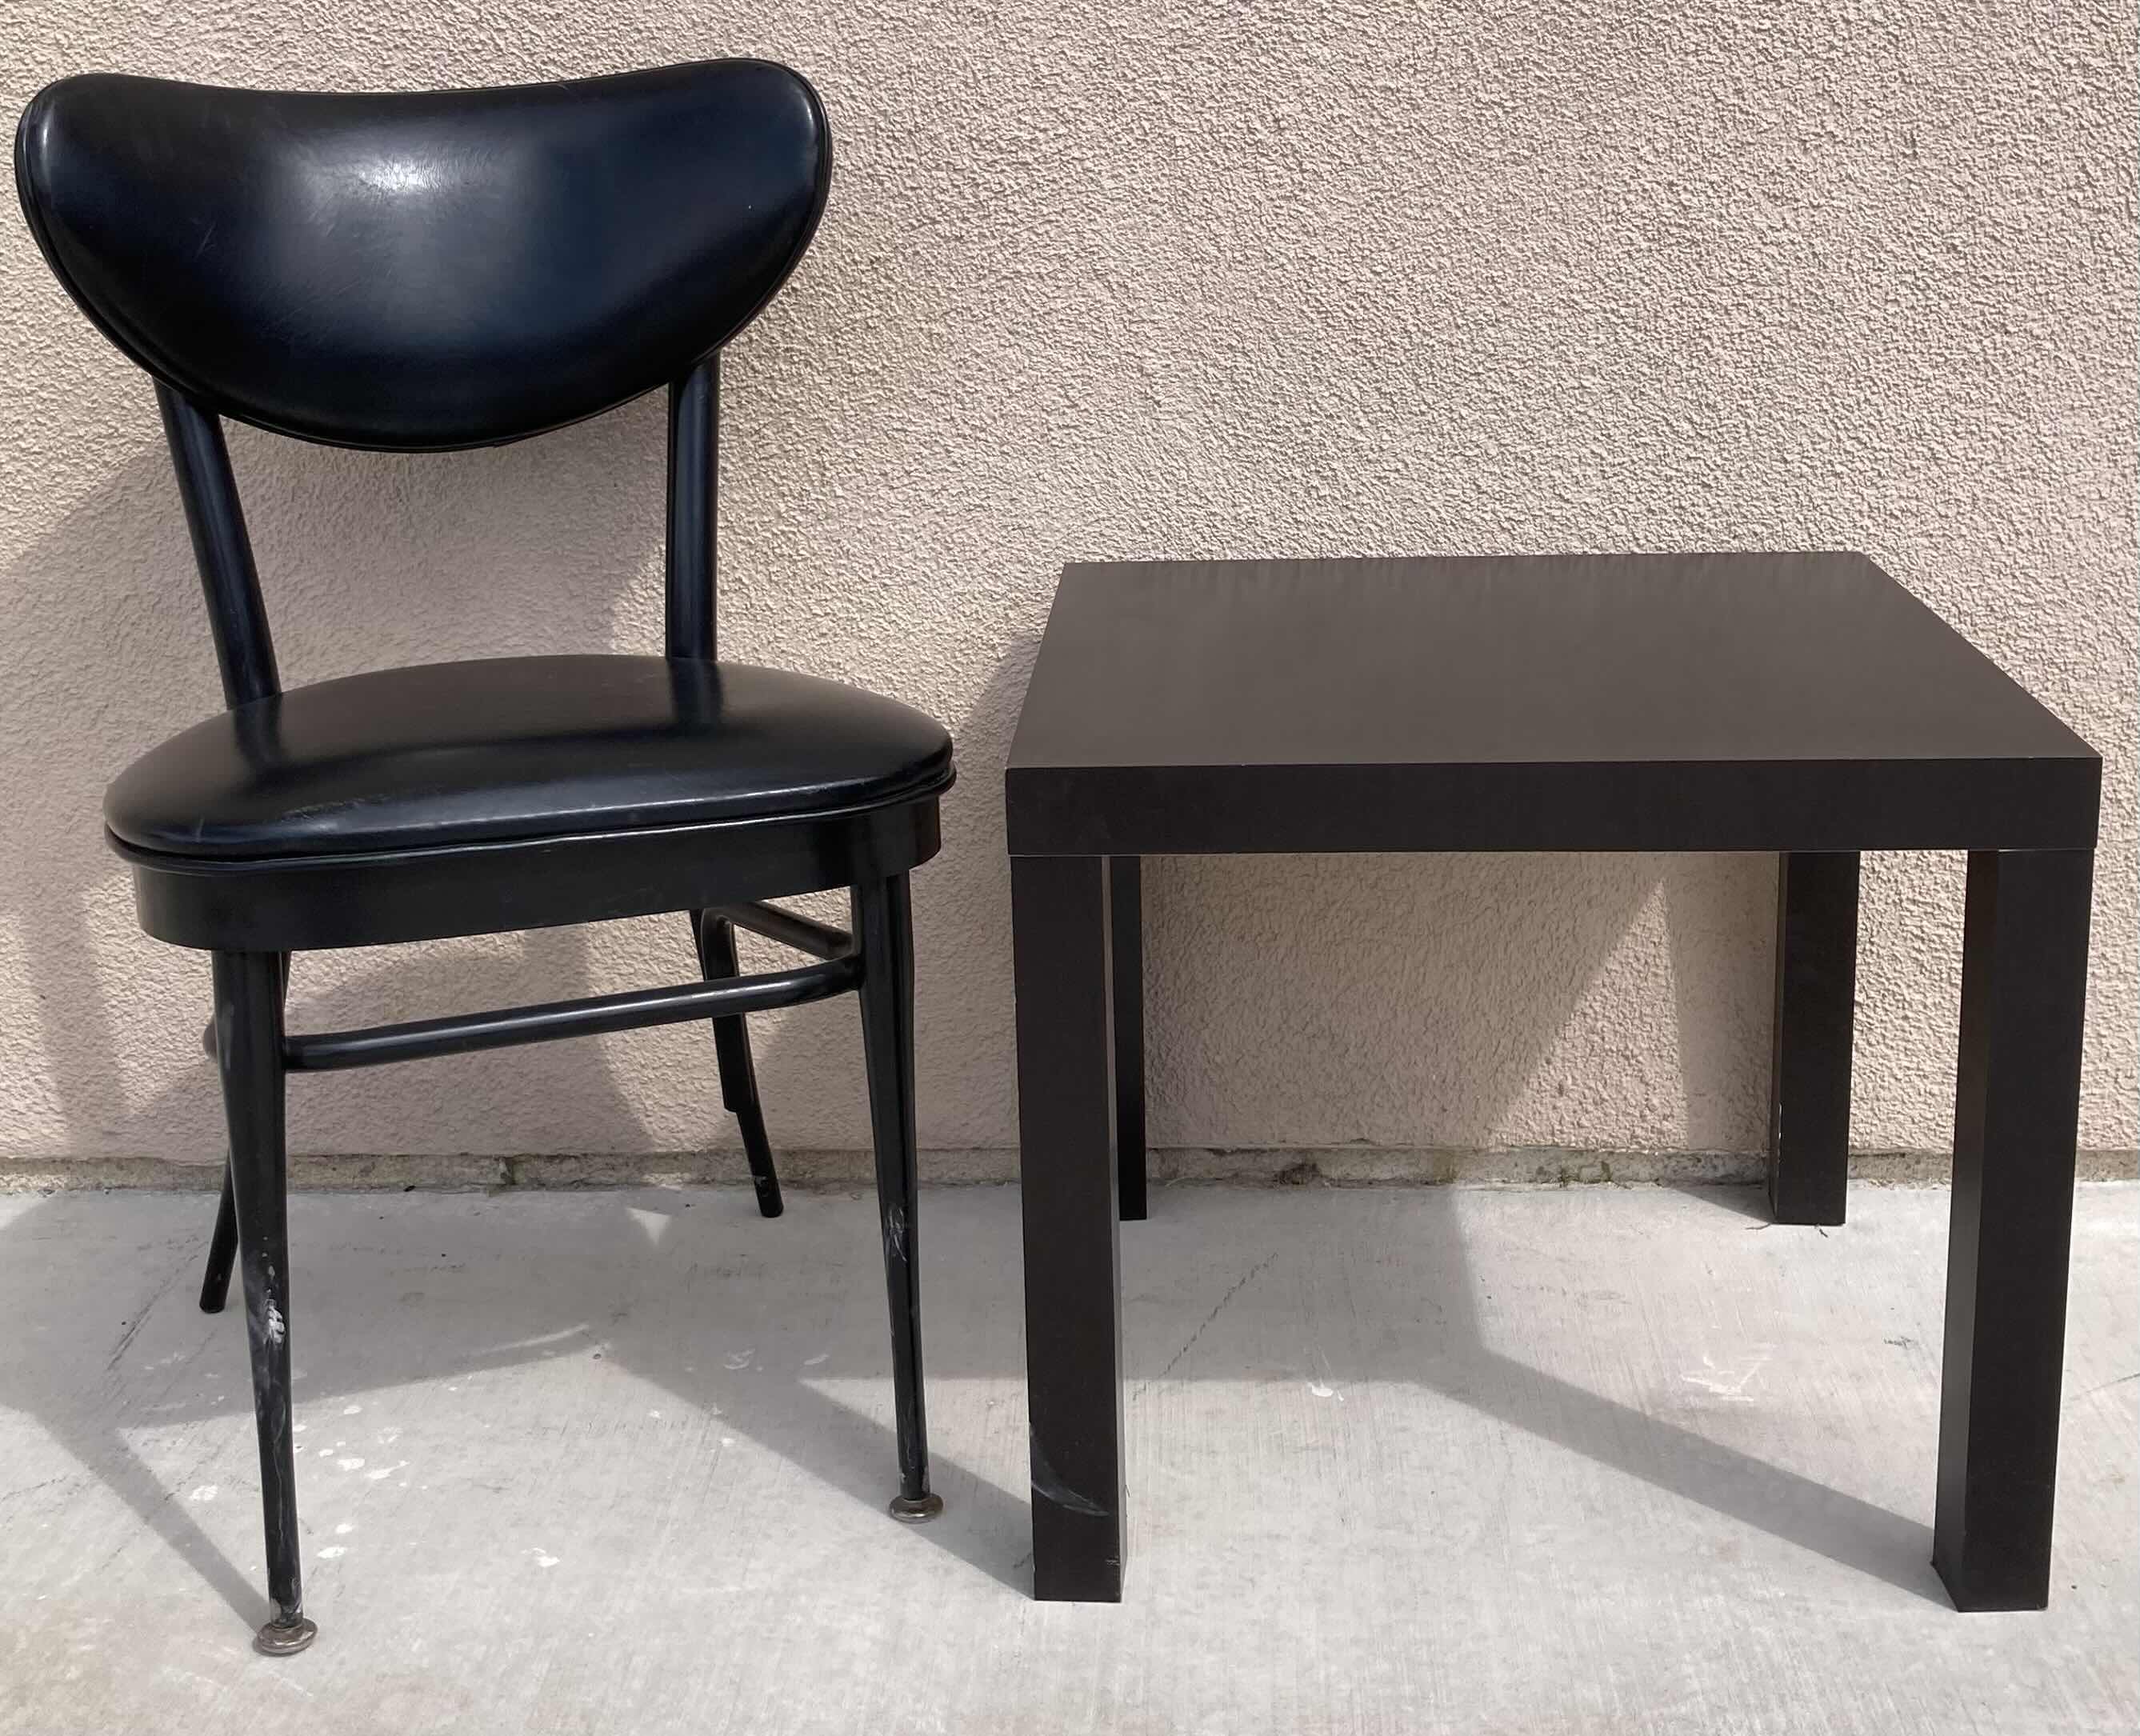 Photo 1 of LION BRAND BLACK METAL PADDED CHAIR & DARK WOOD FINISH SIDE TABLE 20” X 20” H18”